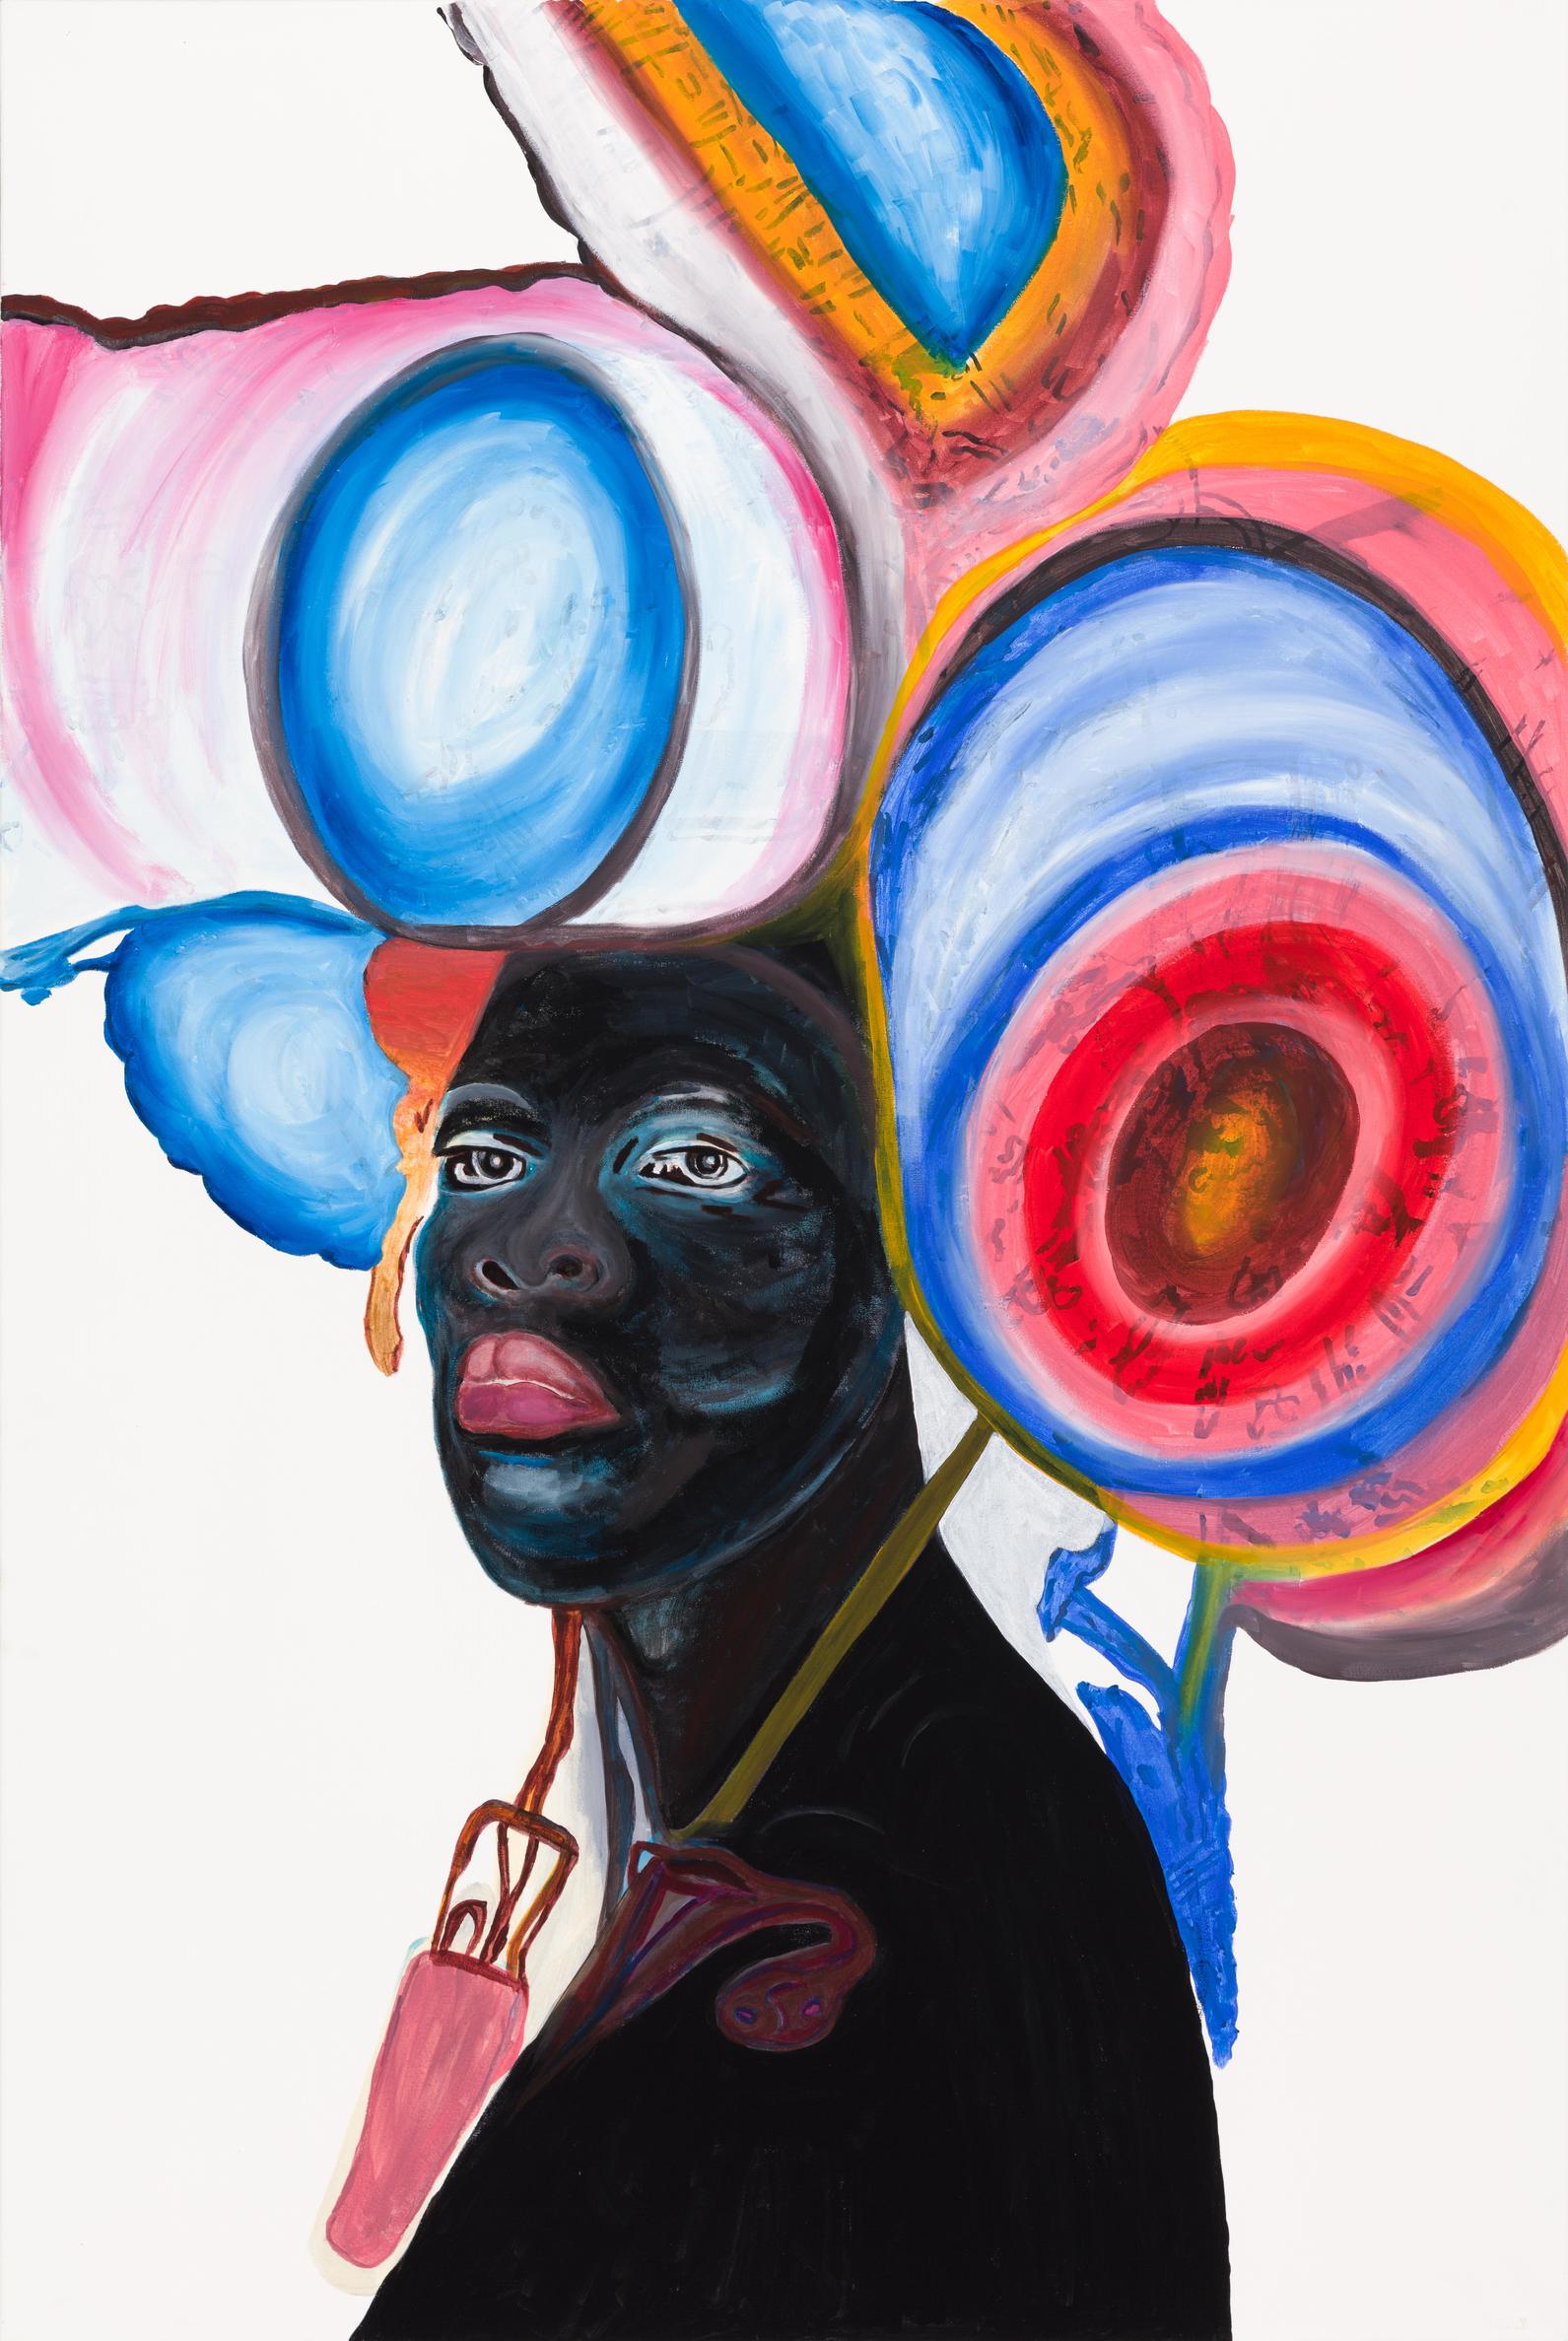 A painting of a person with a colorful large tube-like headpiece.